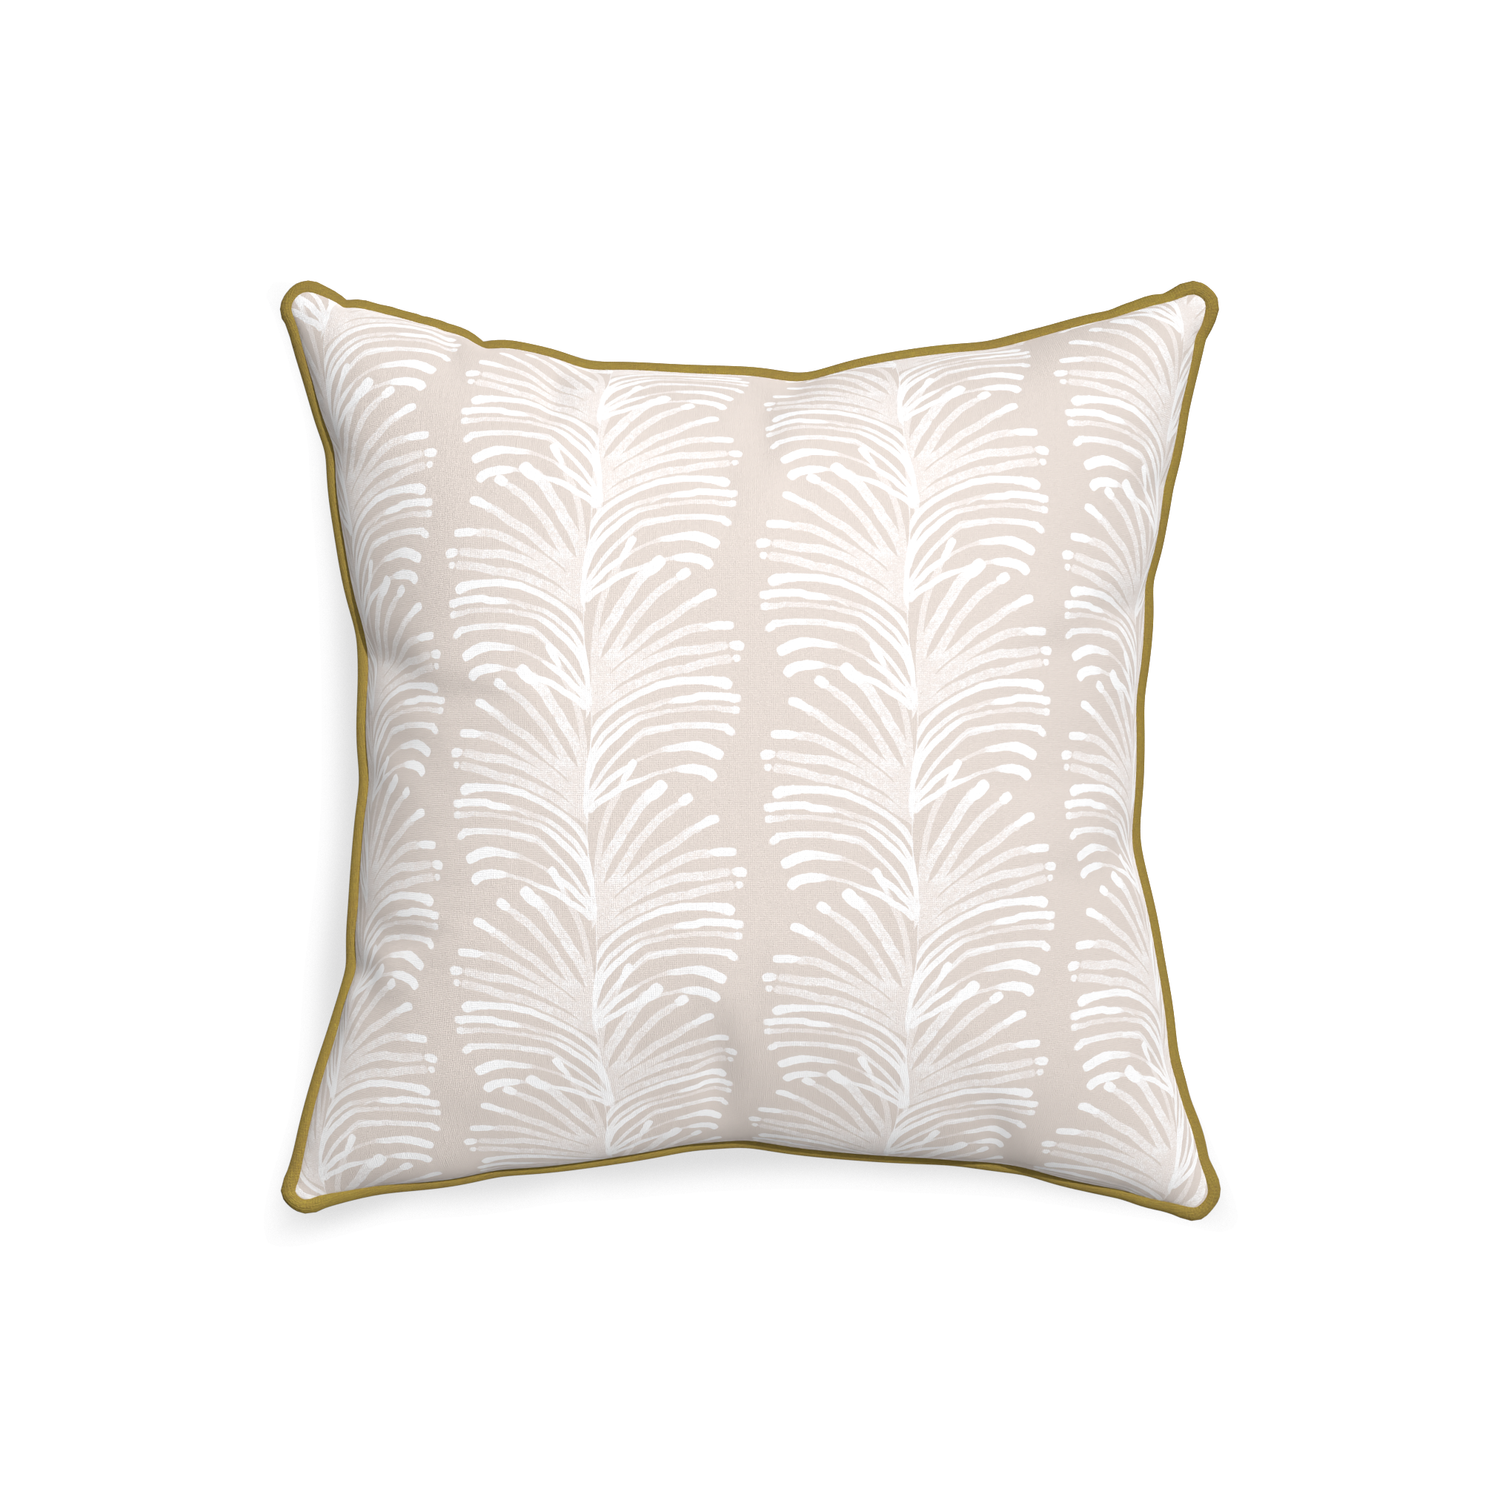 20-square emma sand custom sand colored botanical stripepillow with c piping on white background